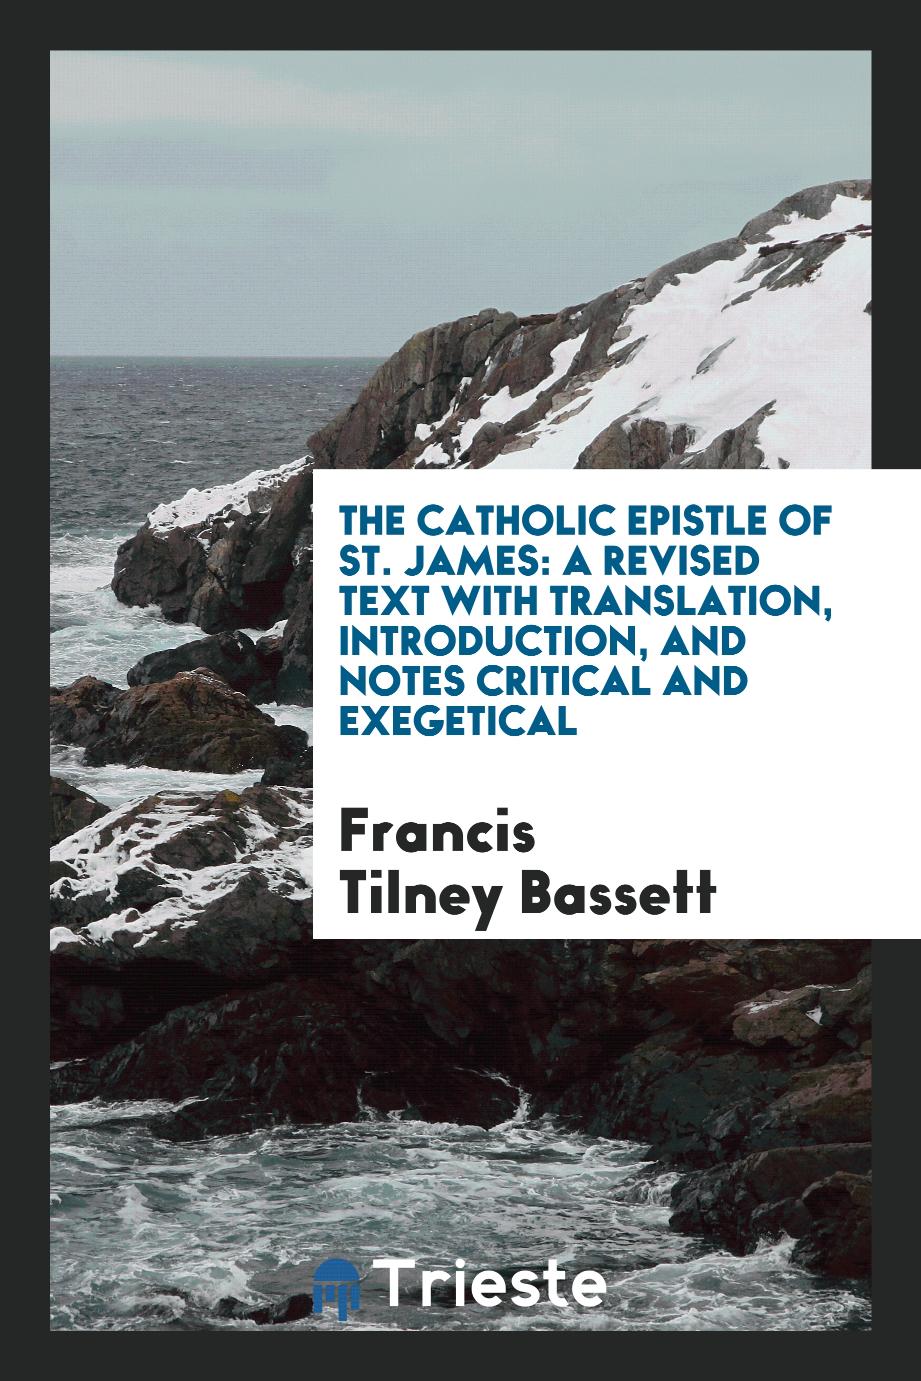 The Catholic epistle of St. James: a revised text with translation, introduction, and notes critical and exegetical